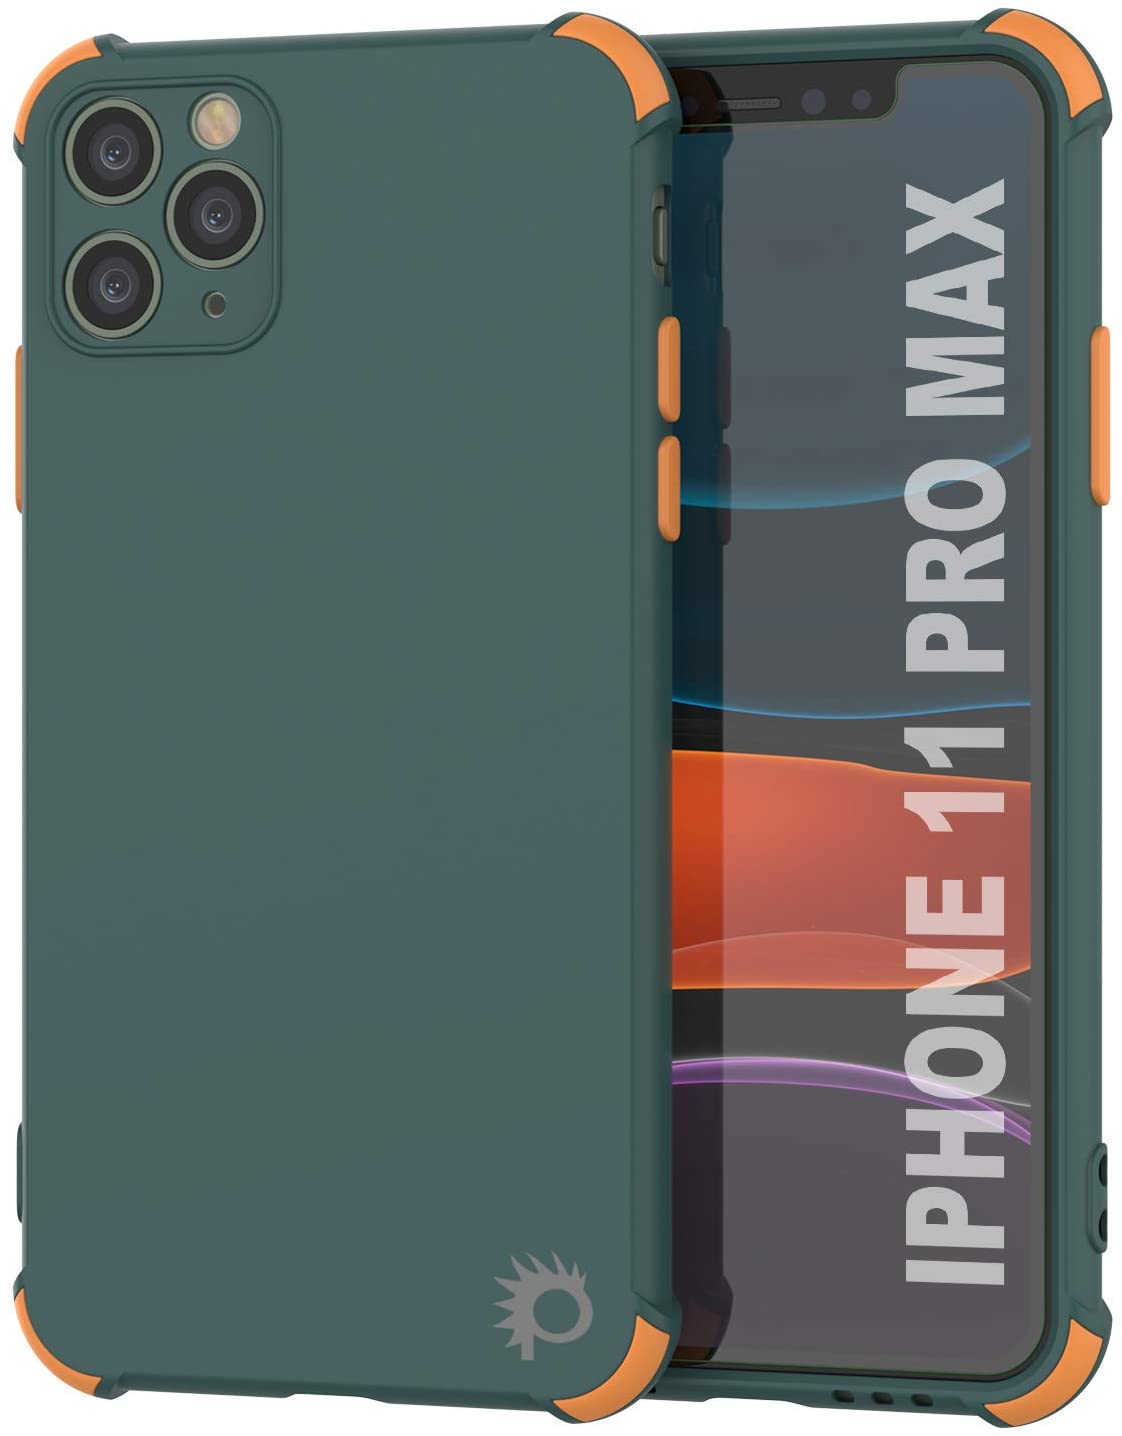 Punkcase Protective & Lightweight TPU Case [Sunshine Series] for iPhone 11 Pro Max [Dark Green]